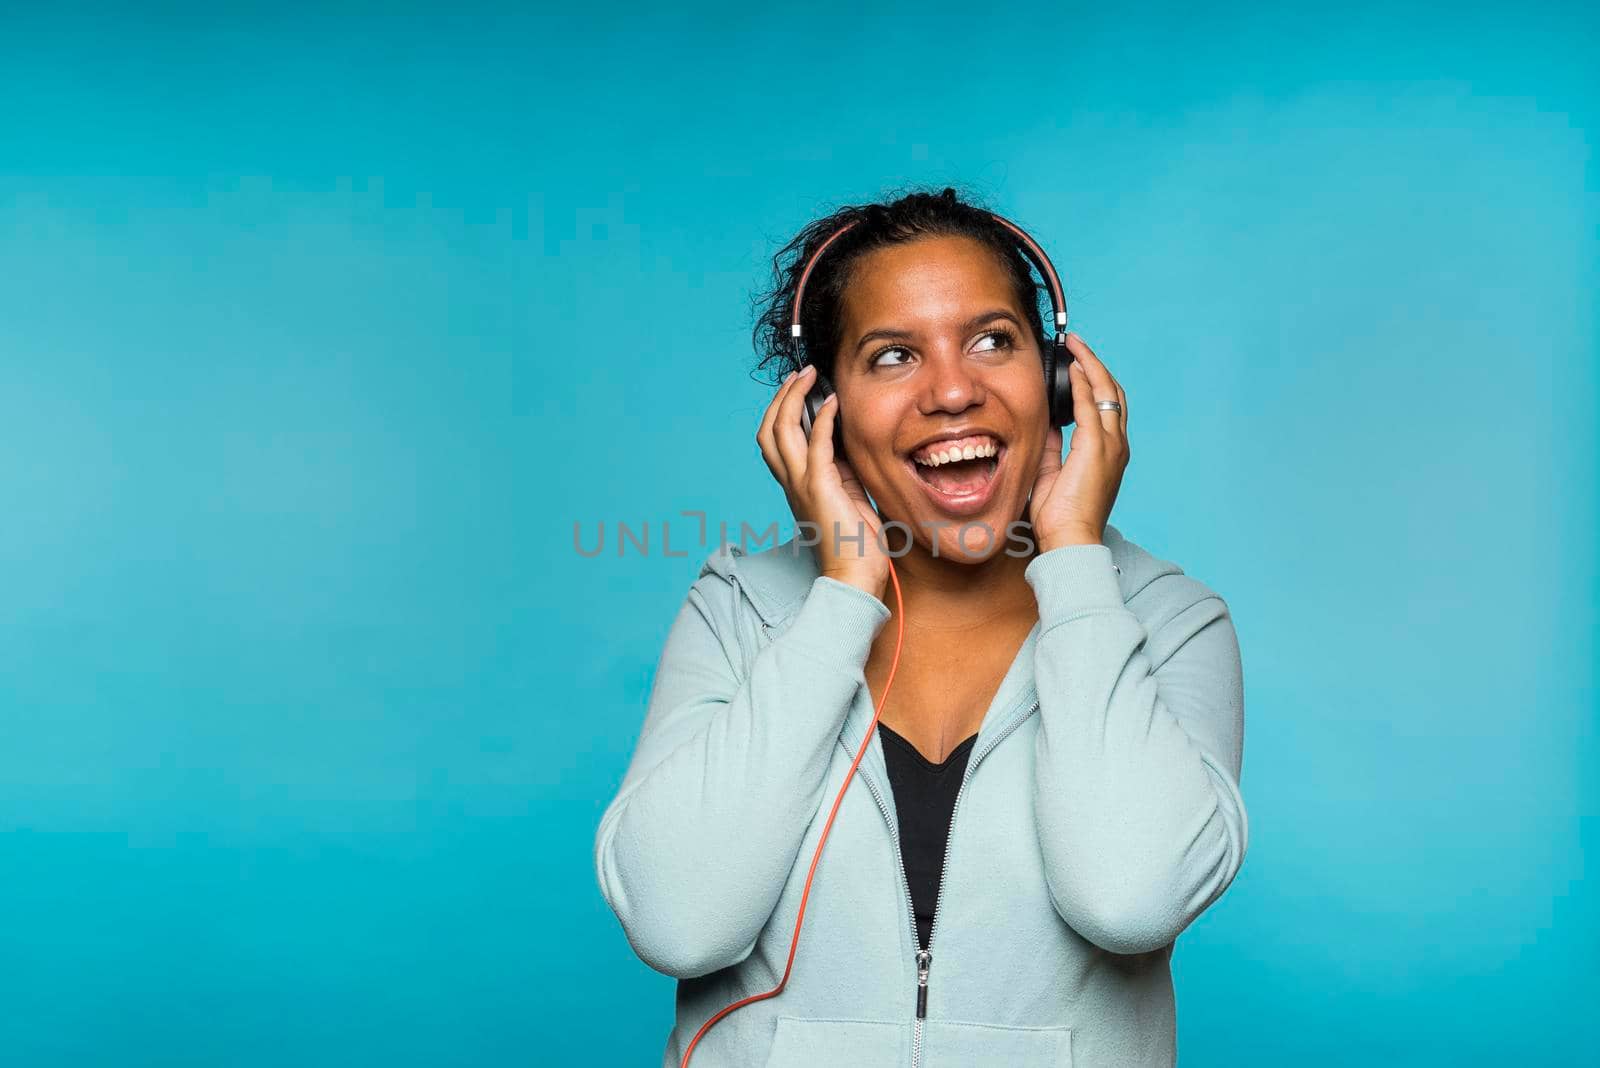 Young attractive mixed race woman enjoying music listening with headphones blue background by LeoniekvanderVliet